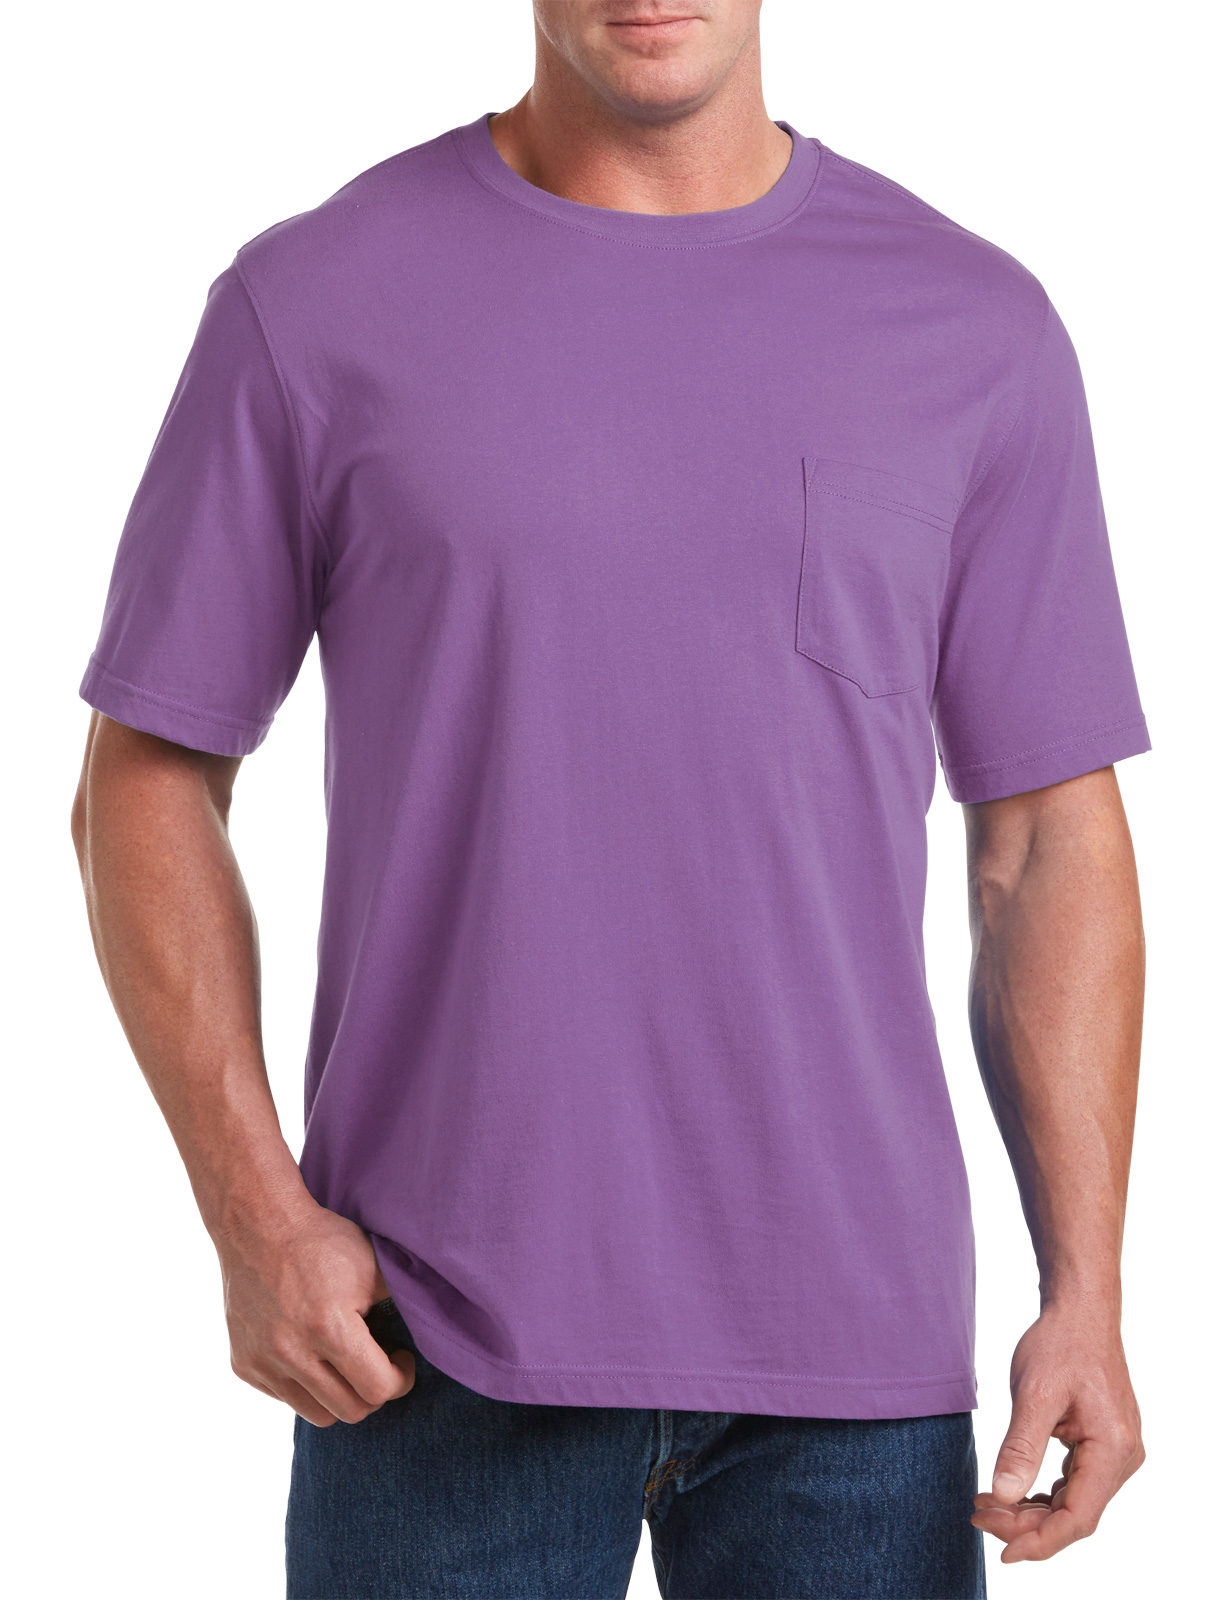 Harbor Bay Men's Big and Tall Wicking Jersey Pocket Tee